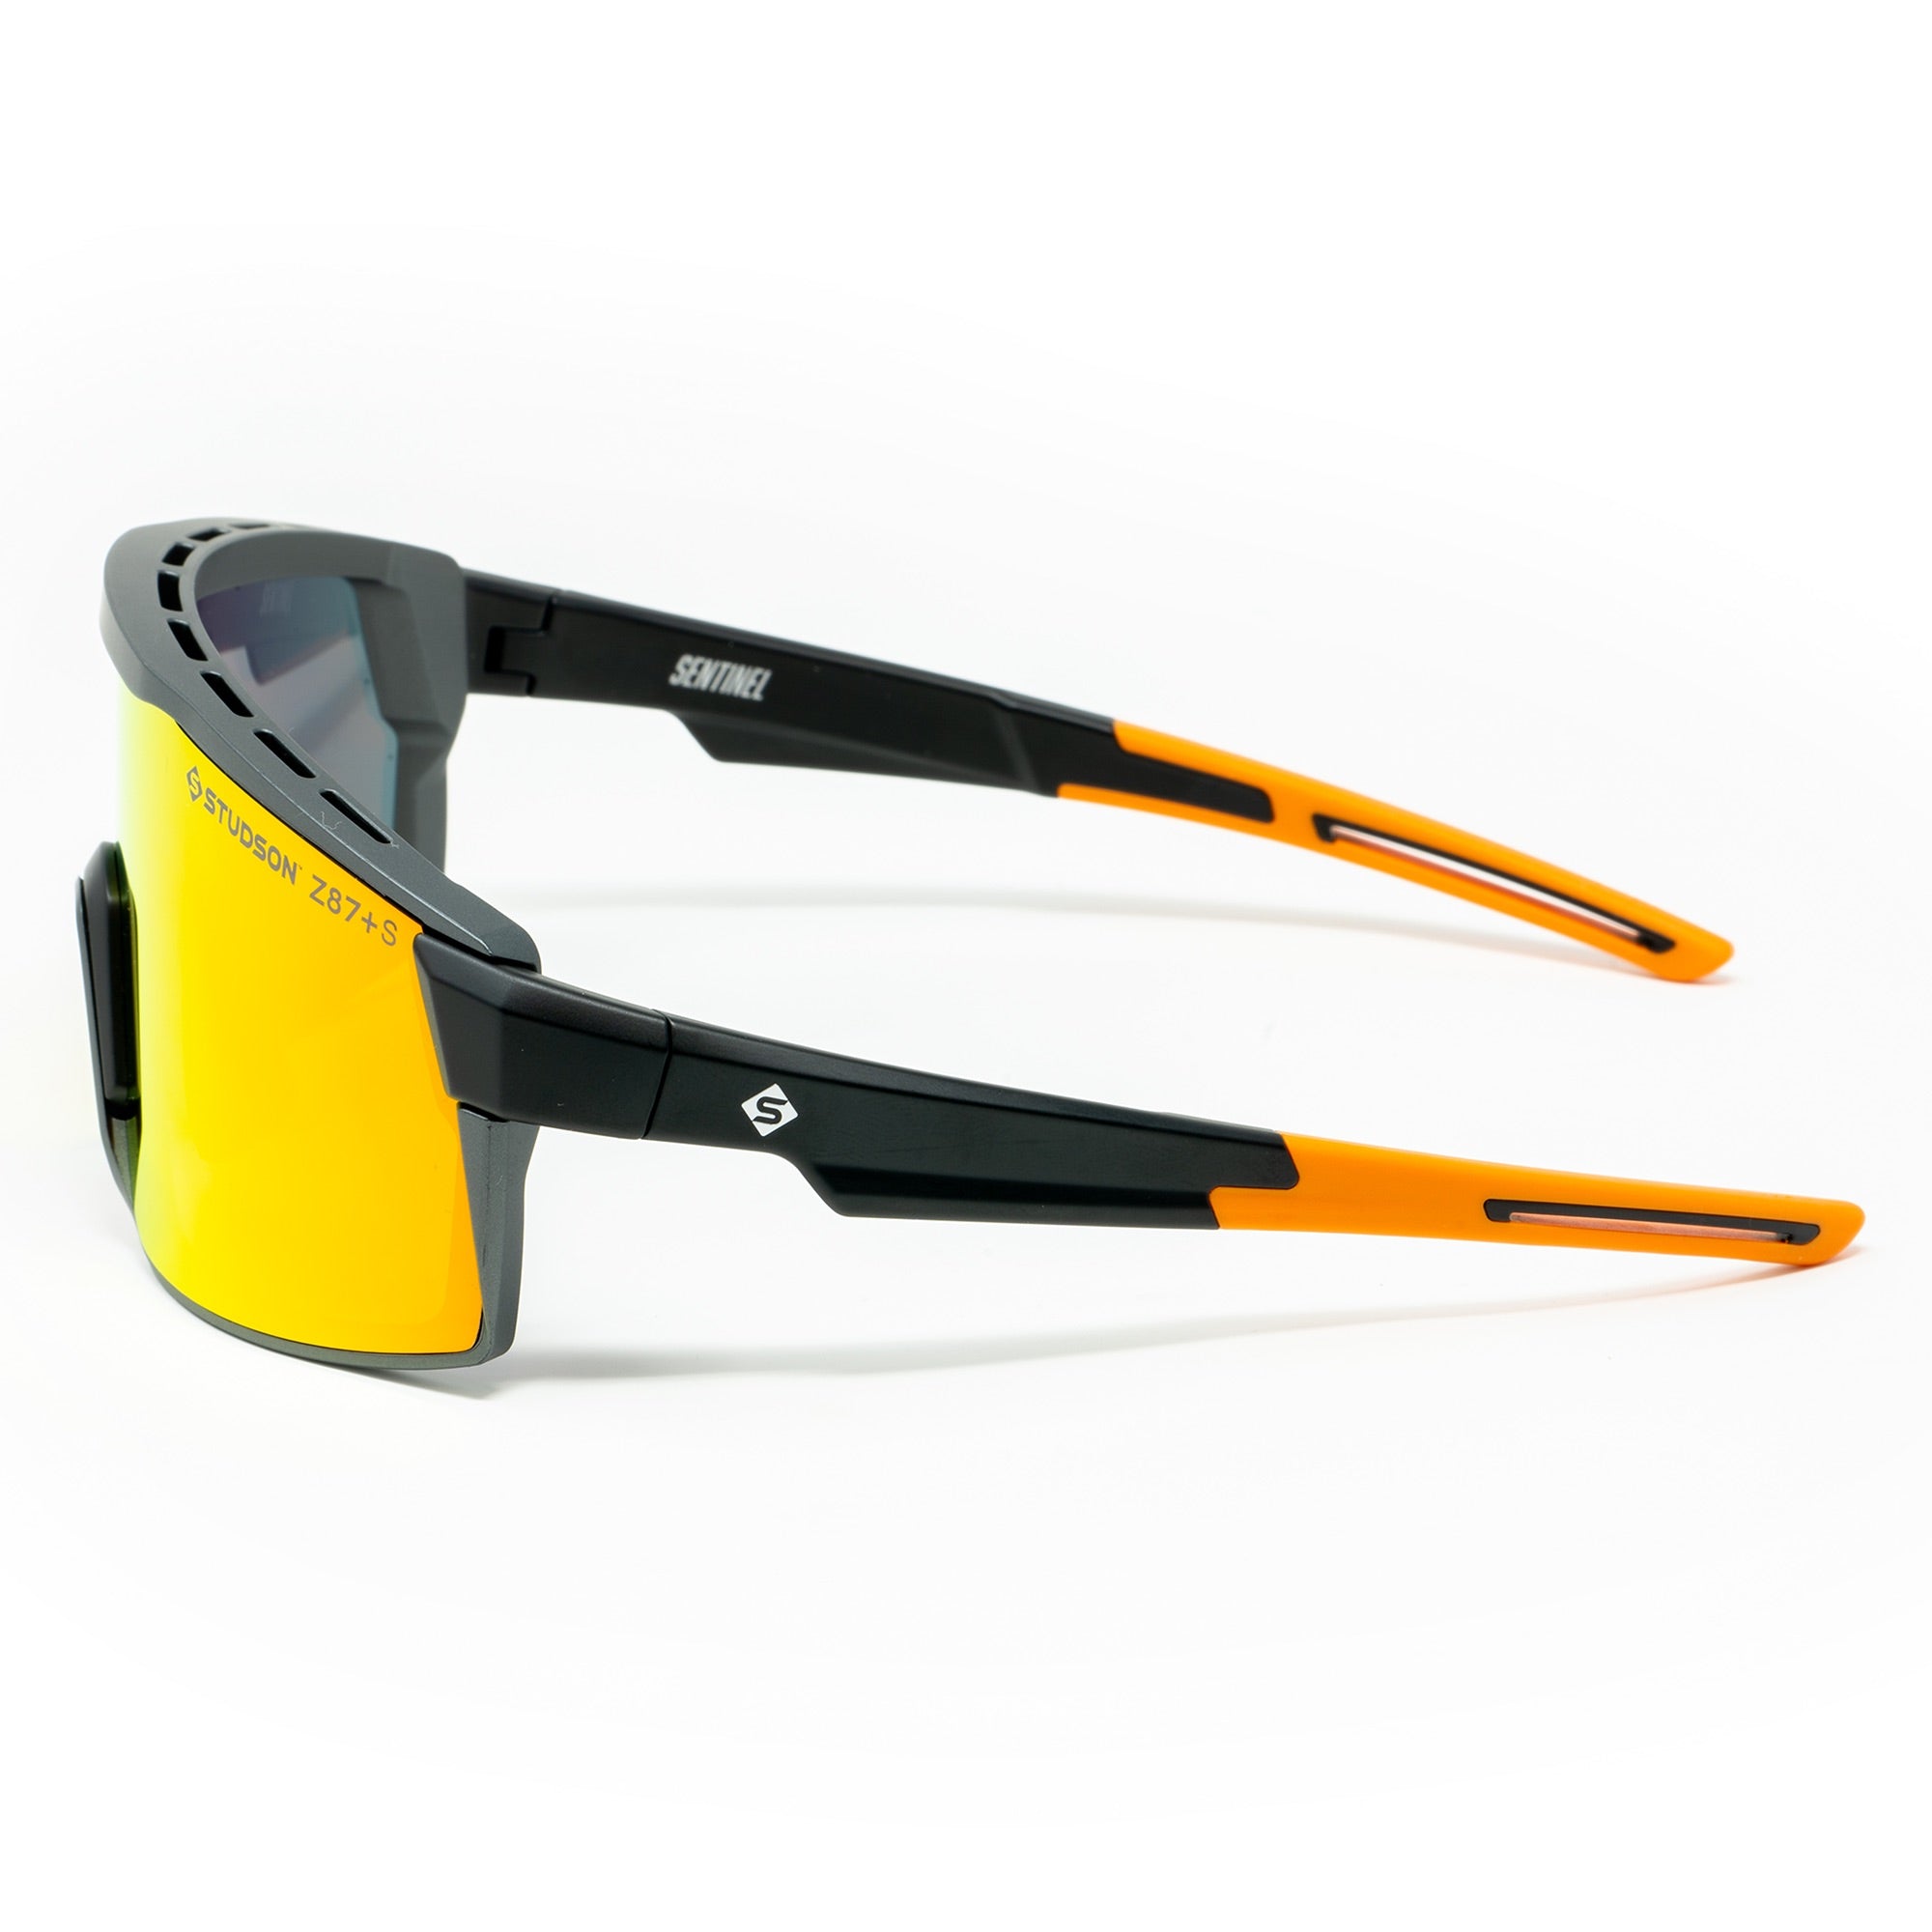 The Sentinel Safety Glasses